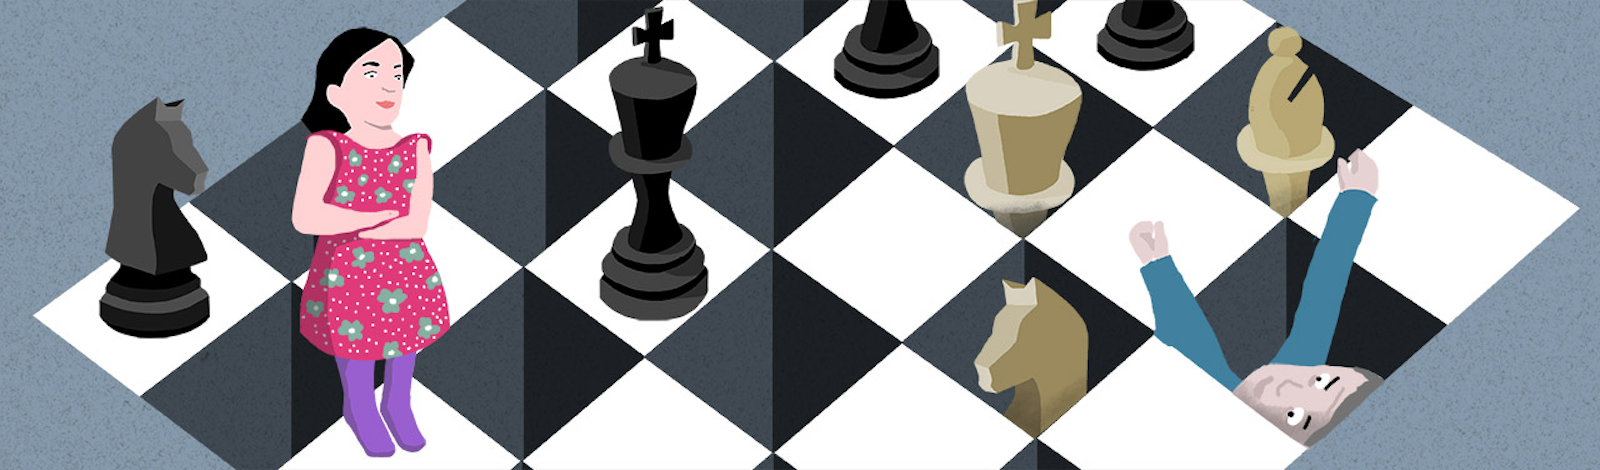 Chess for Beginners: Learn the rules to go deeper in this game and